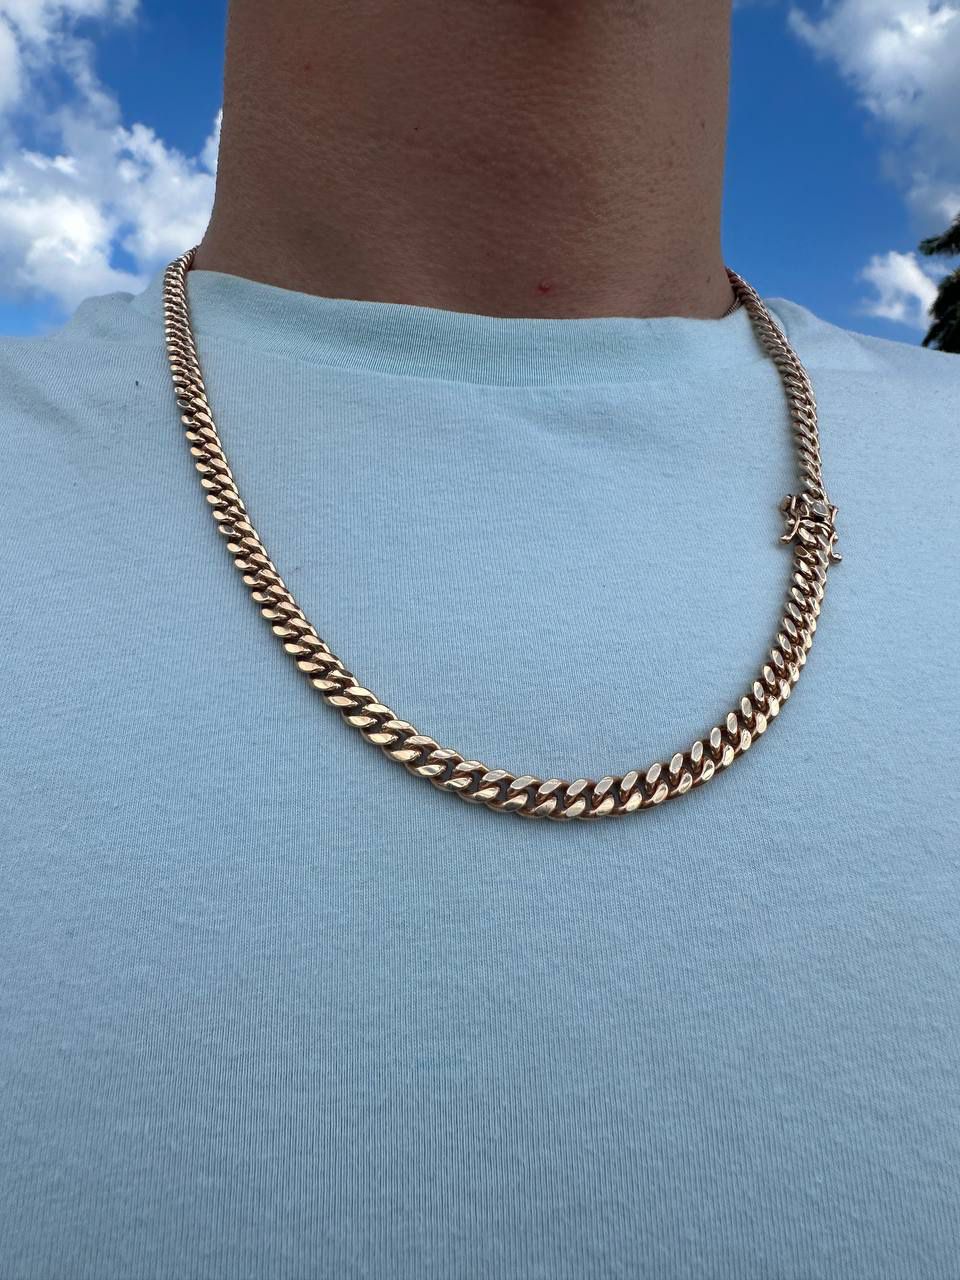 10k solid rose gold Cuban chain 22 inches 6mm 50 grams